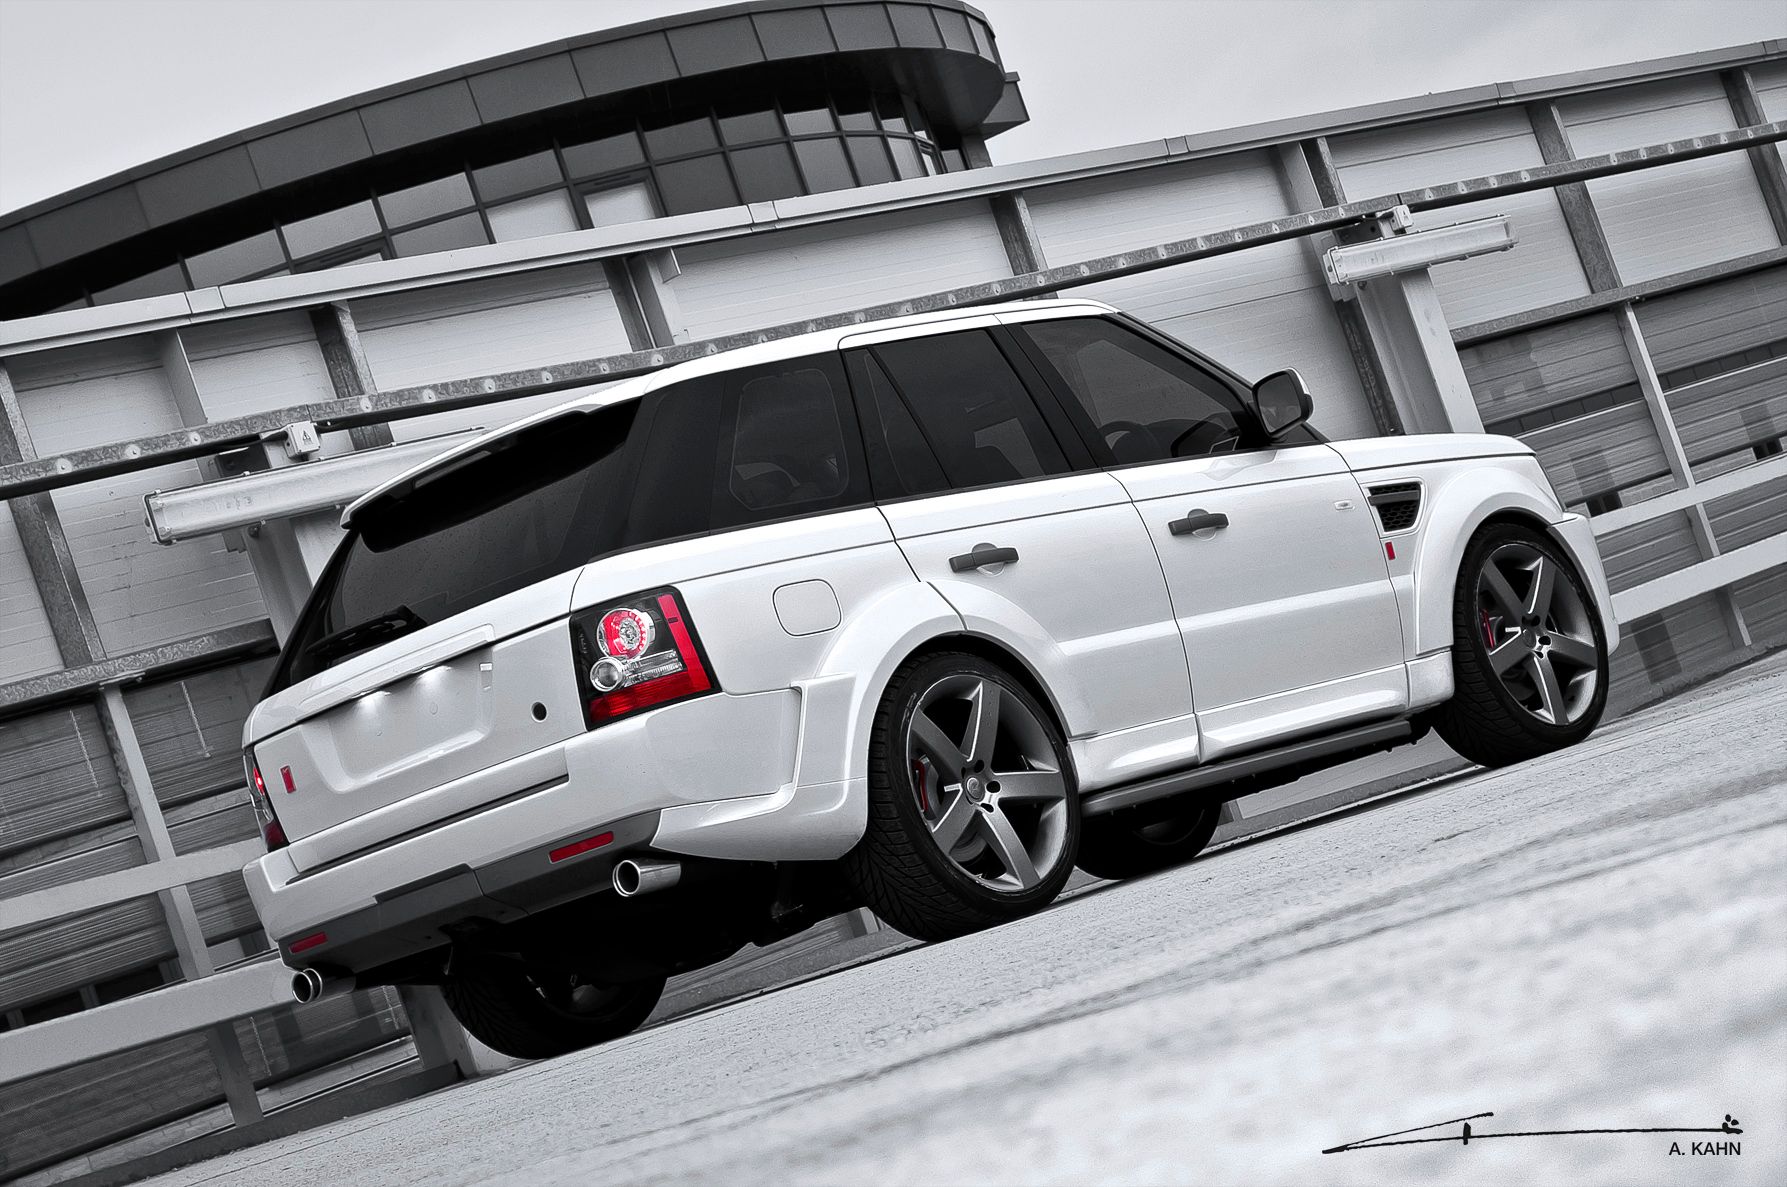 2011 Range Rover Sport RS300 Cosworth by Kahn Design